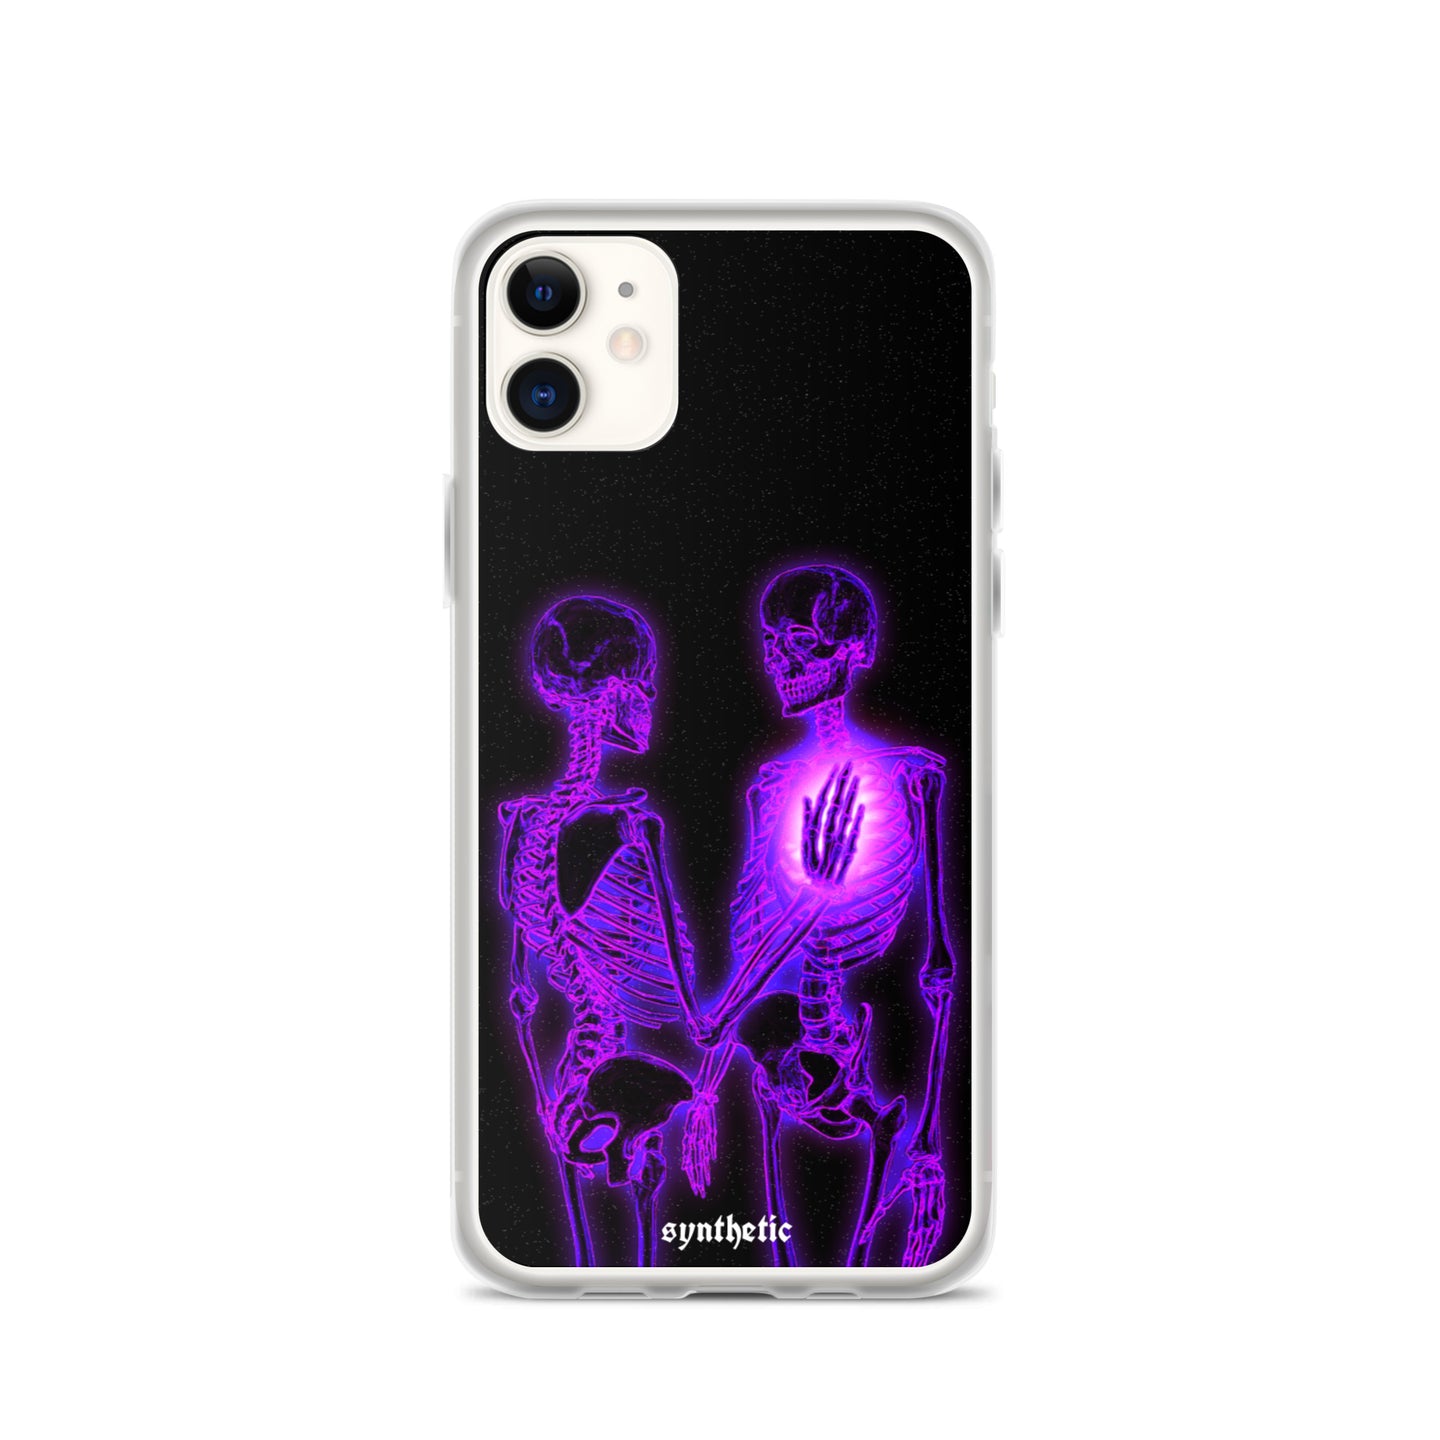 'the wound where the light enters' iphone case